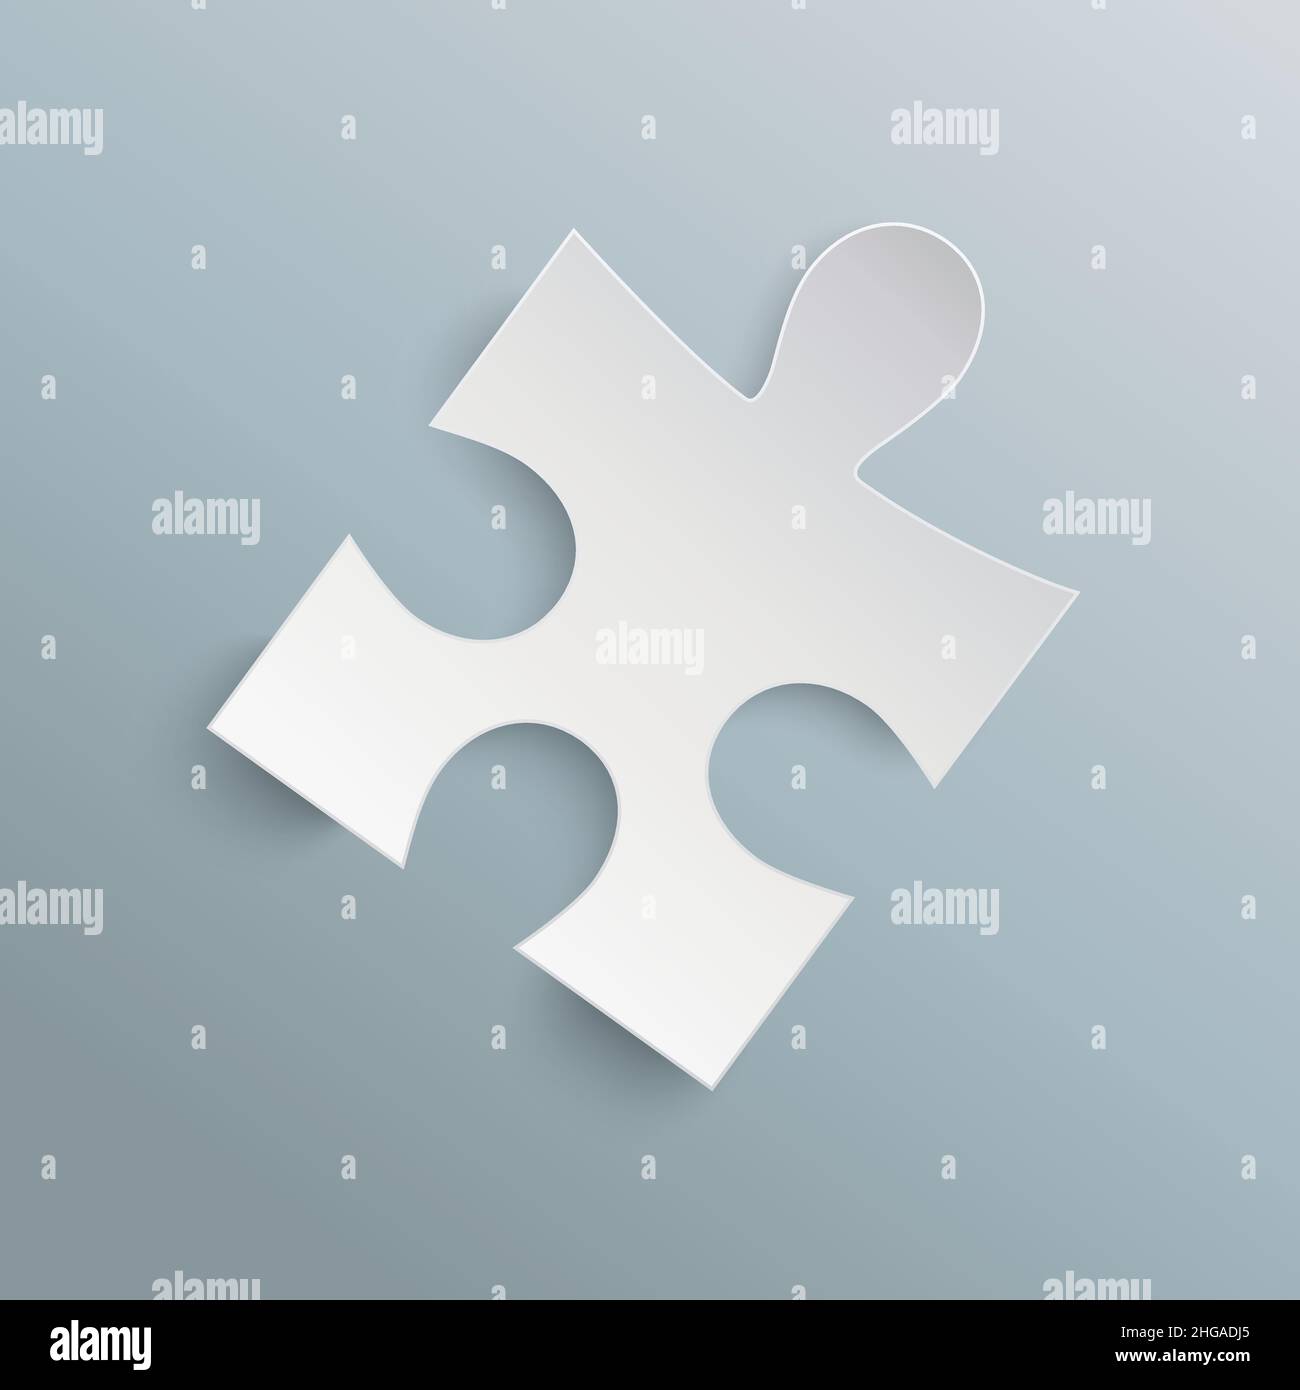 Transparent Jigsaw Piece Vector Images (over 860)